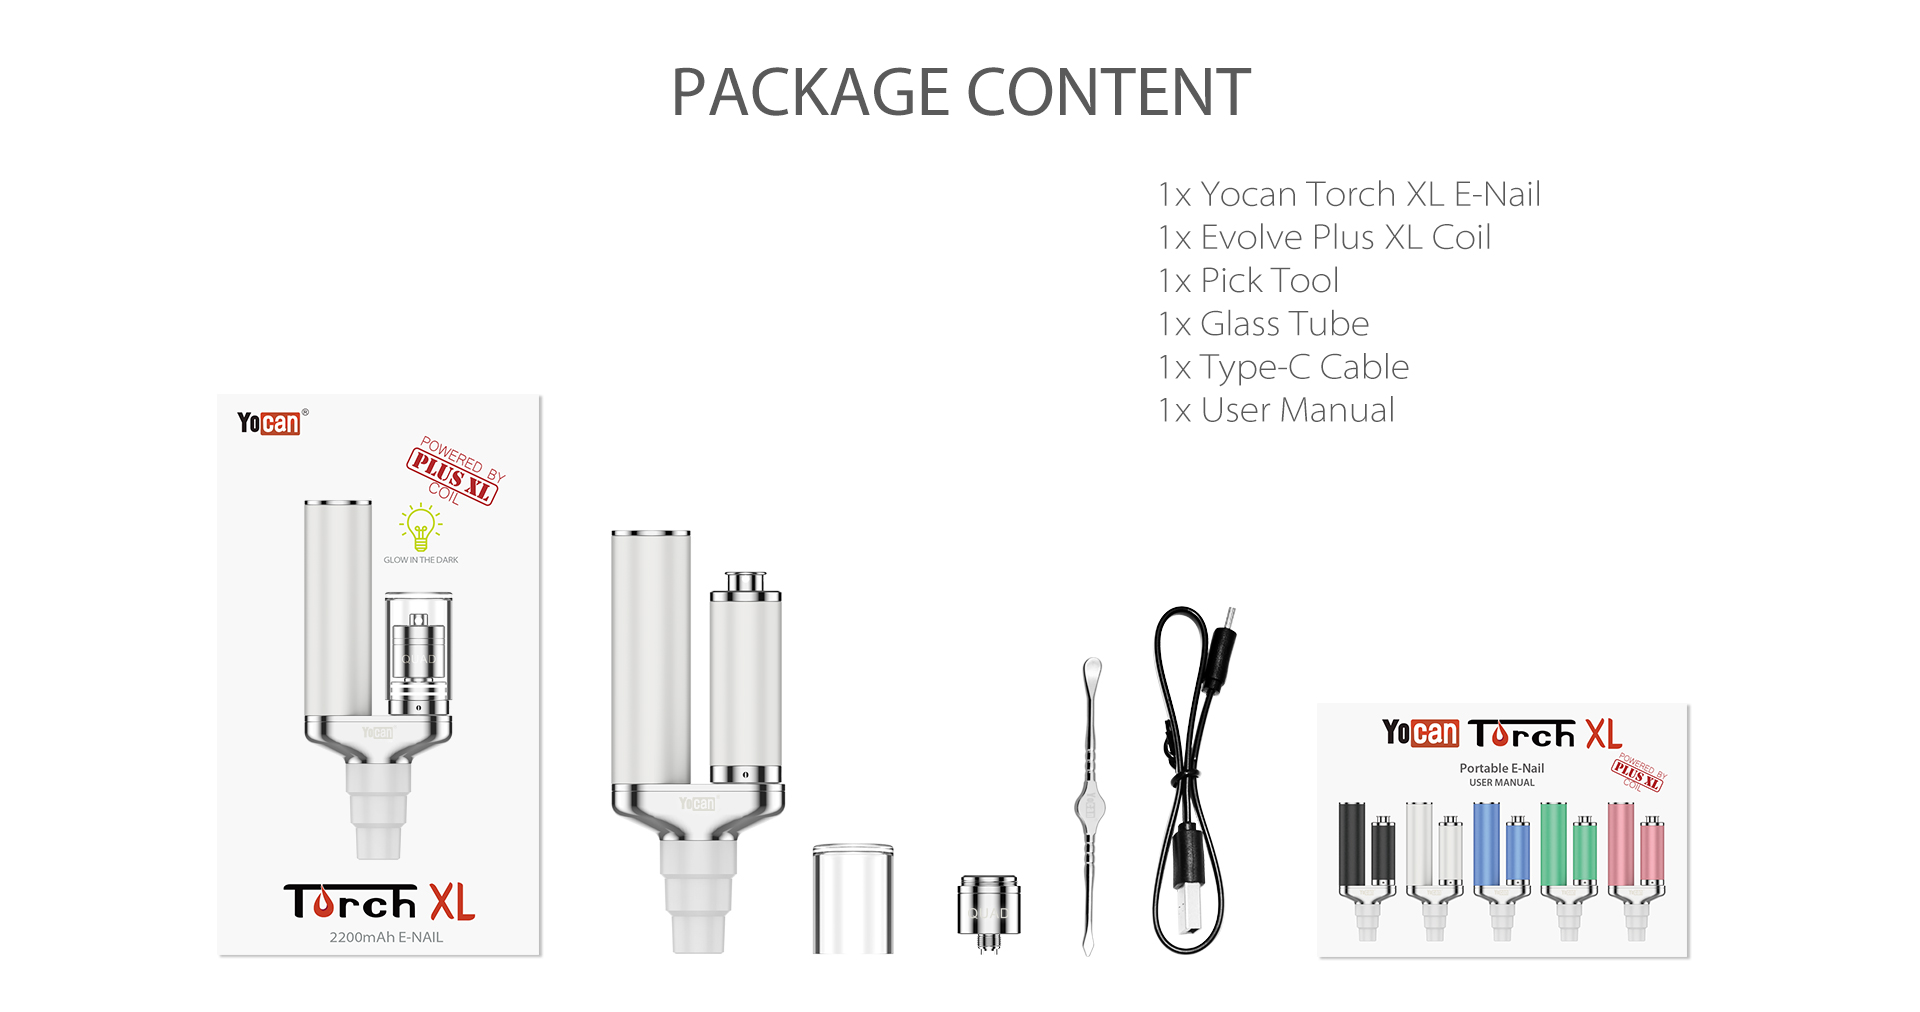 Yocan Torch XL package content